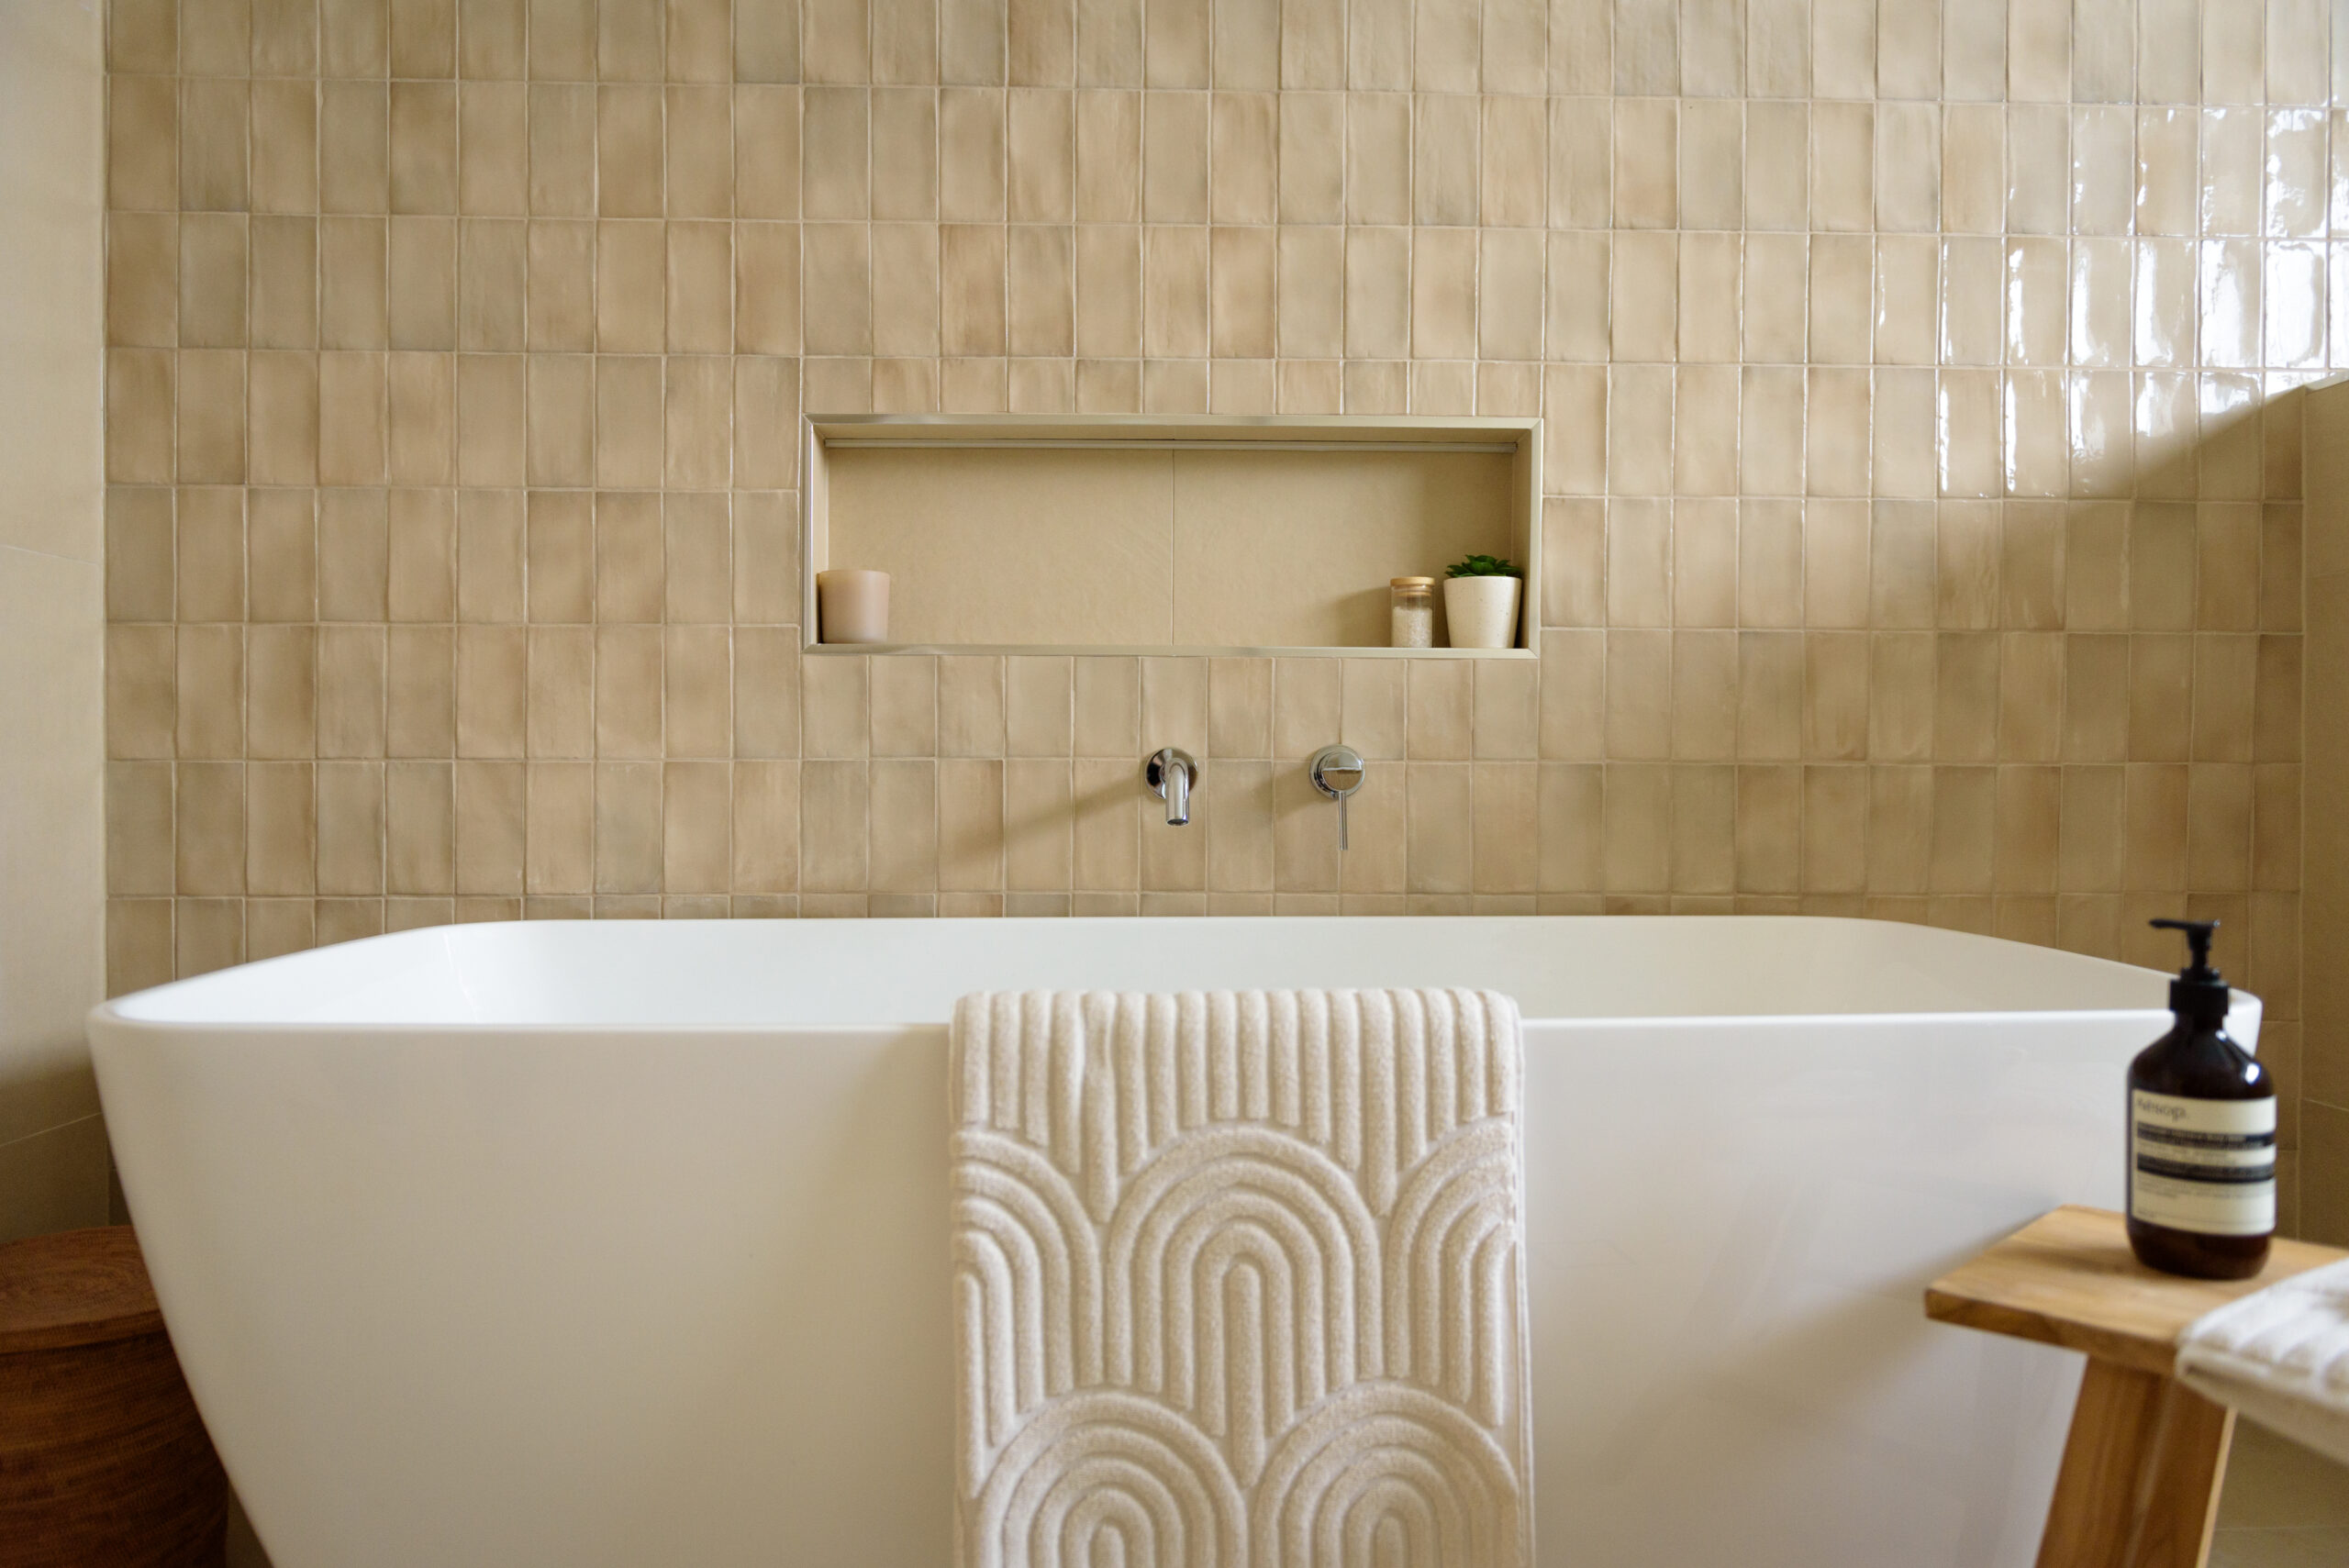 Image of the bathroom renovation in Sydney with a bathtub, feature tile wall and niche